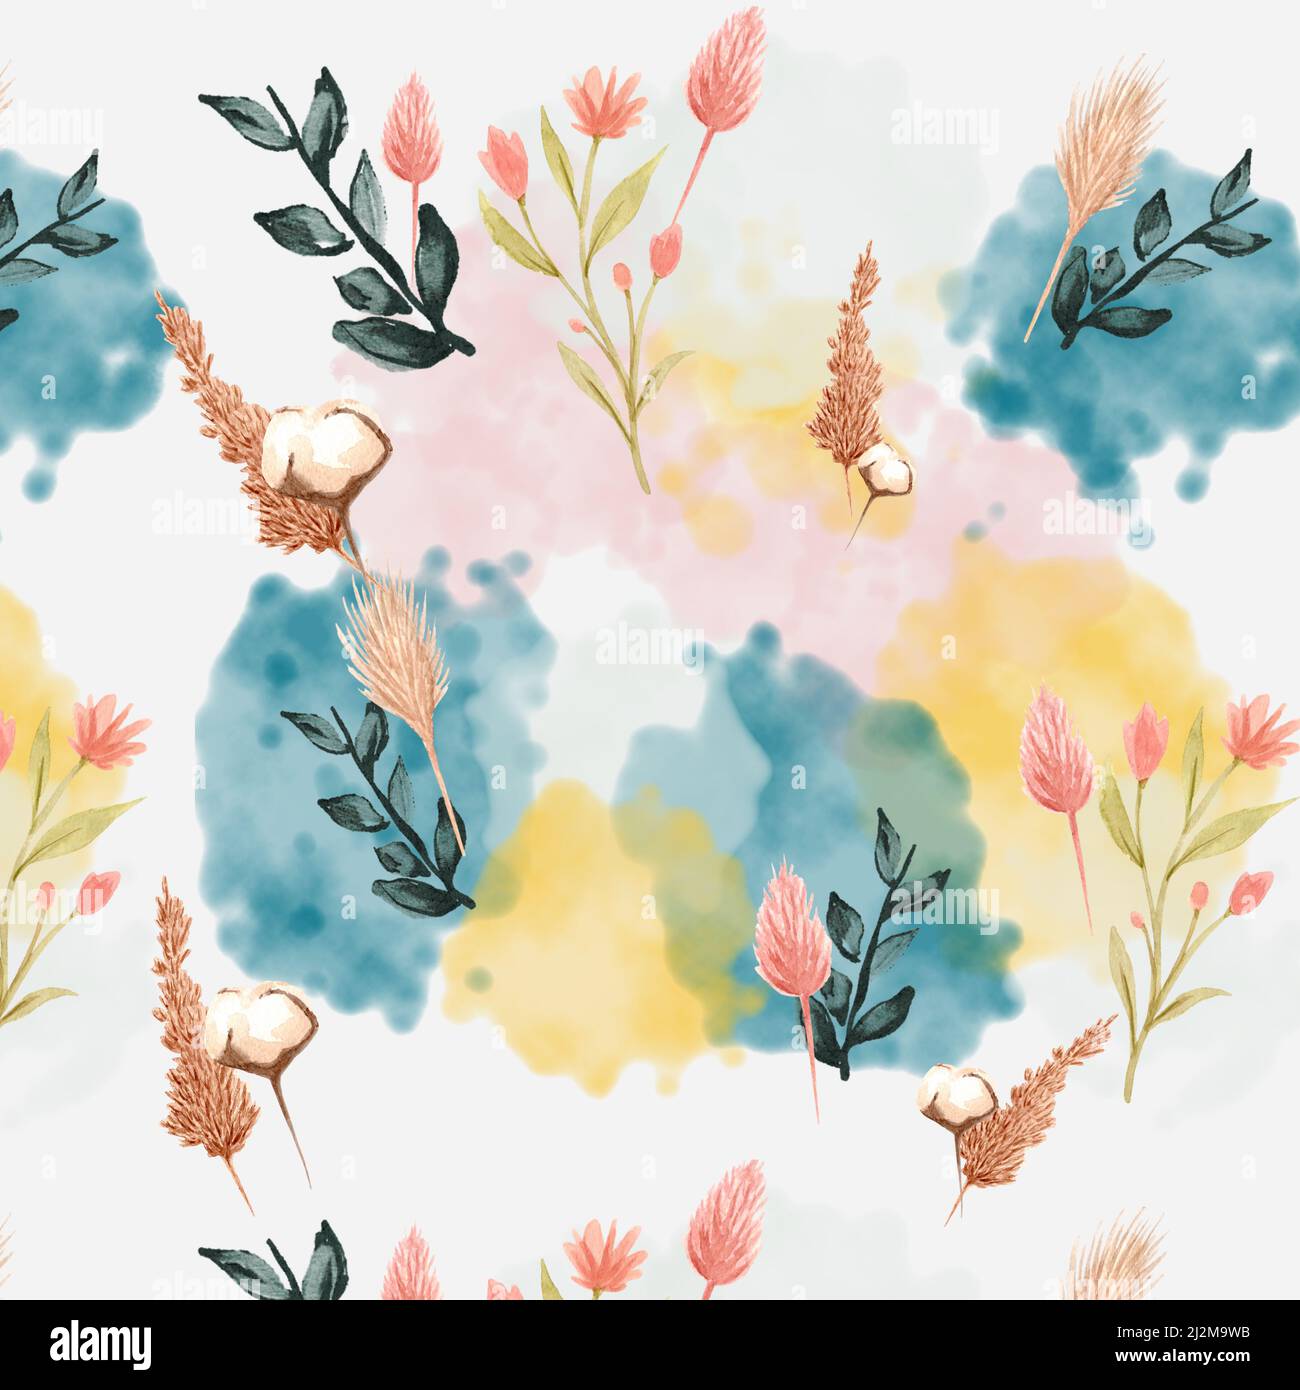 Boho watercolor floral pattern background in teal, desert rose, saffron yellow shades of wildflowers in this pretty design element. Stock Photo